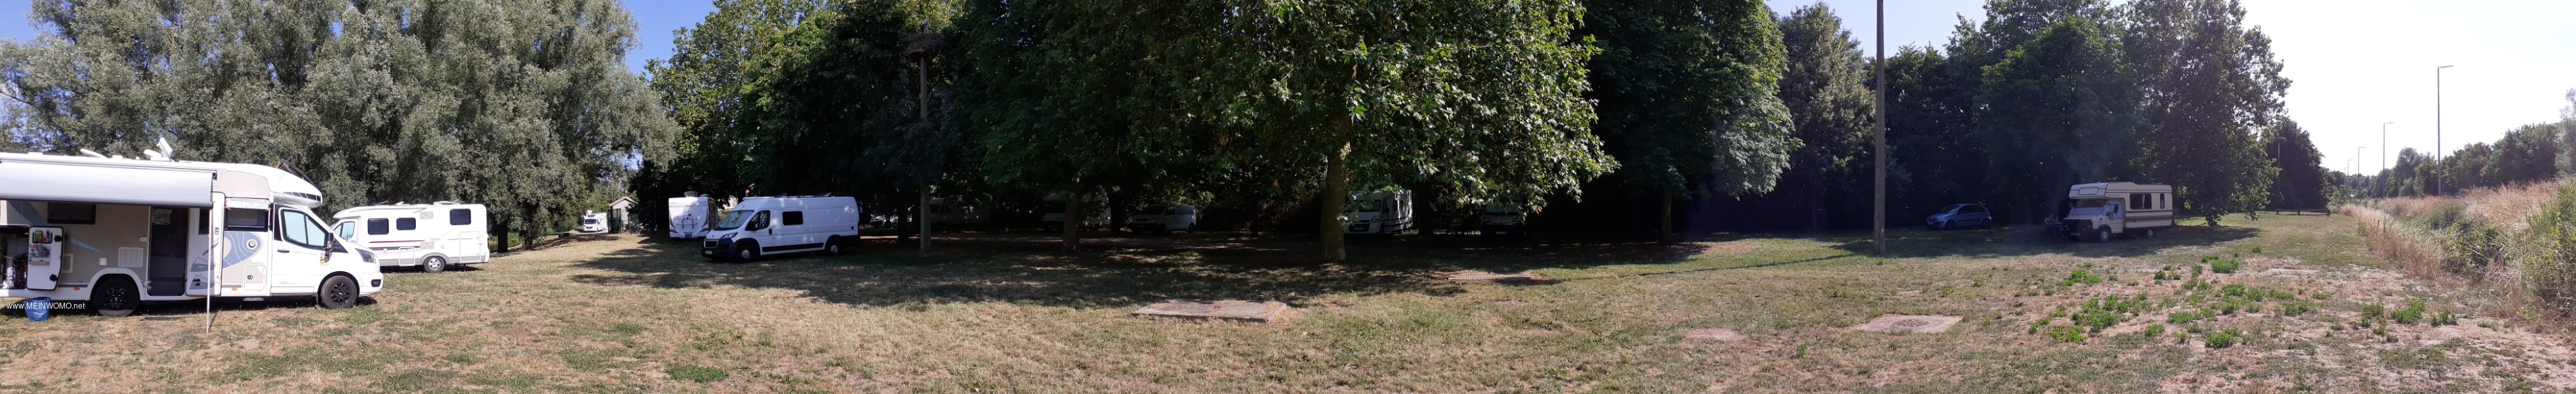 Panorama of the square. The dark area shows the footprint under the trees